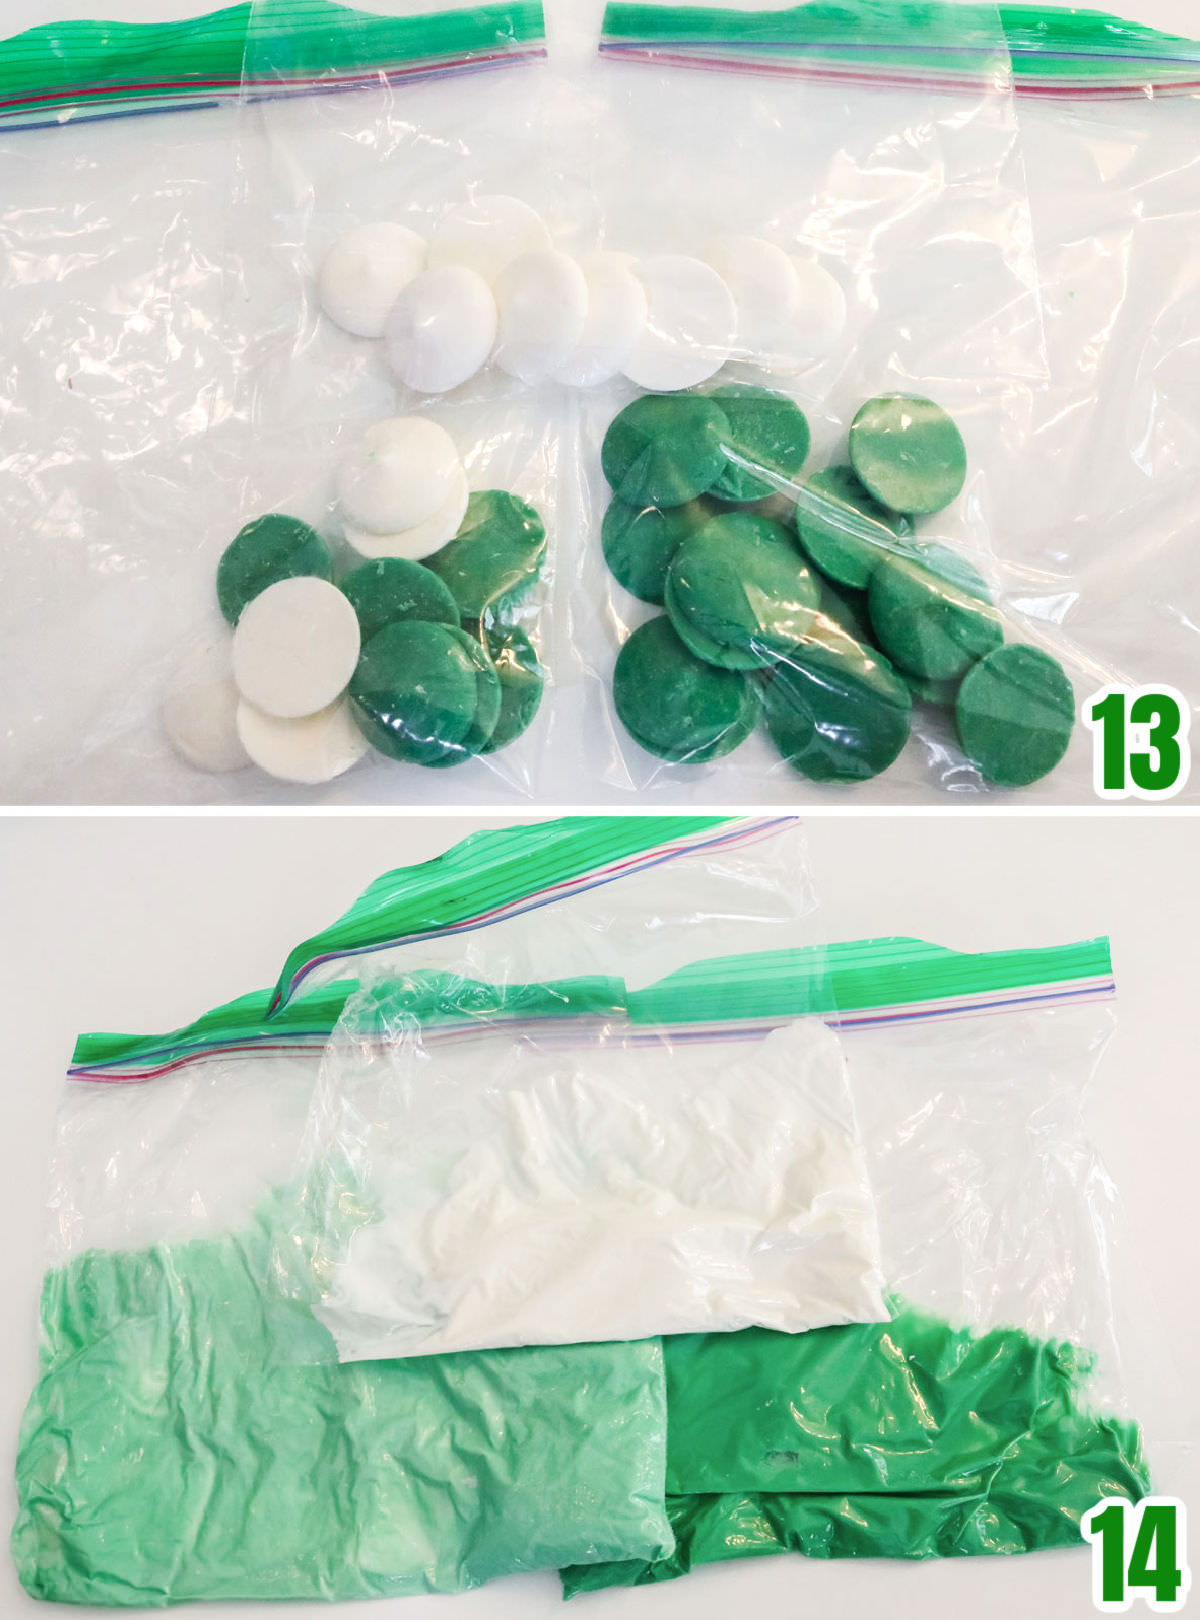 Collage image showing candy melts in plastic baggies and the melted candy melts after coming out of the microwave.